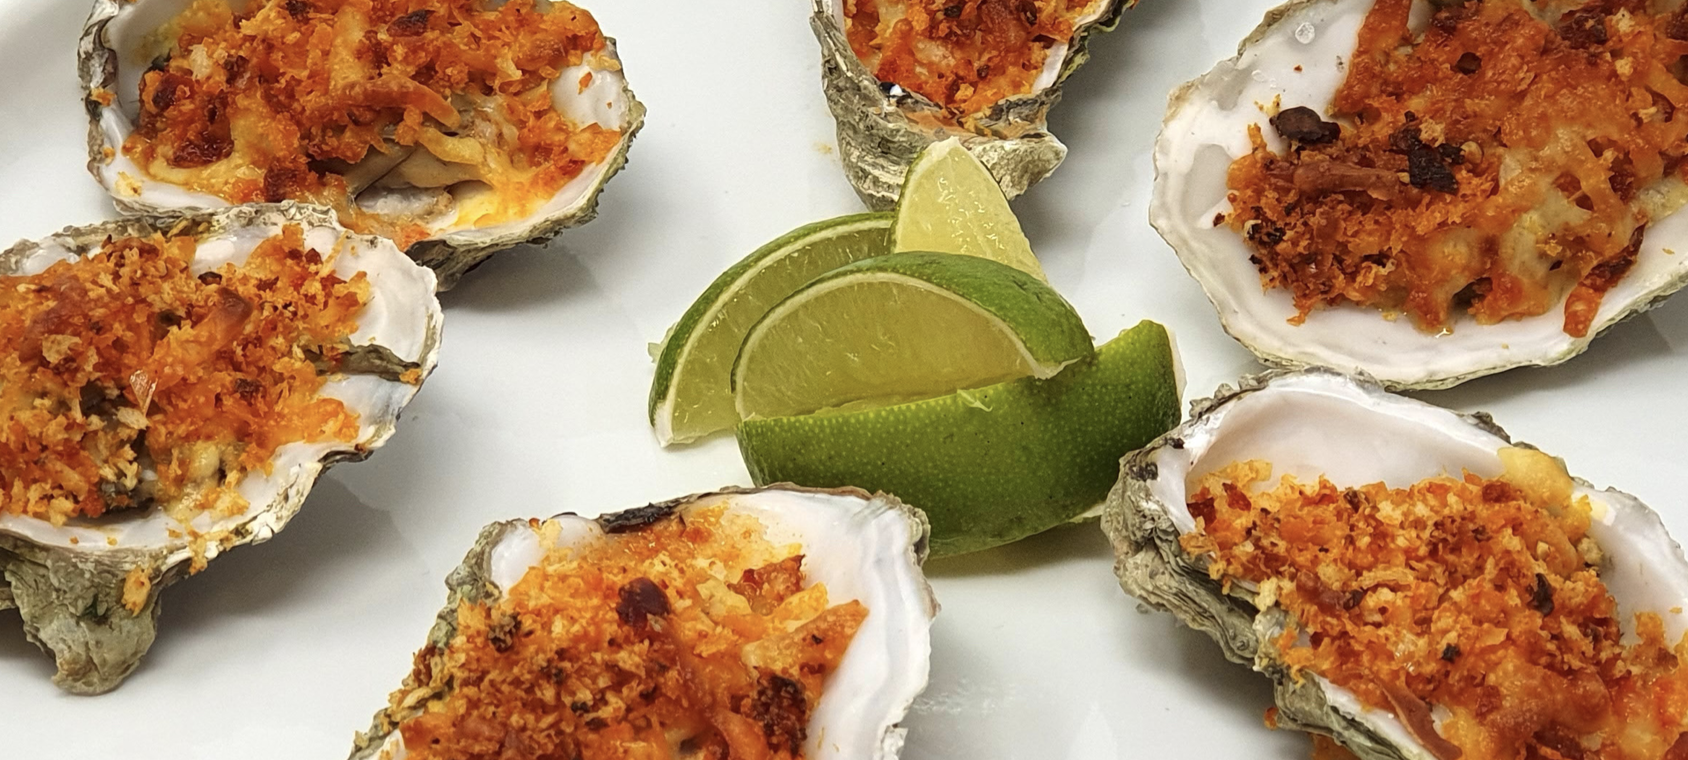 Baked oysters with a Rose Harissa and Manchego cheese crust dish